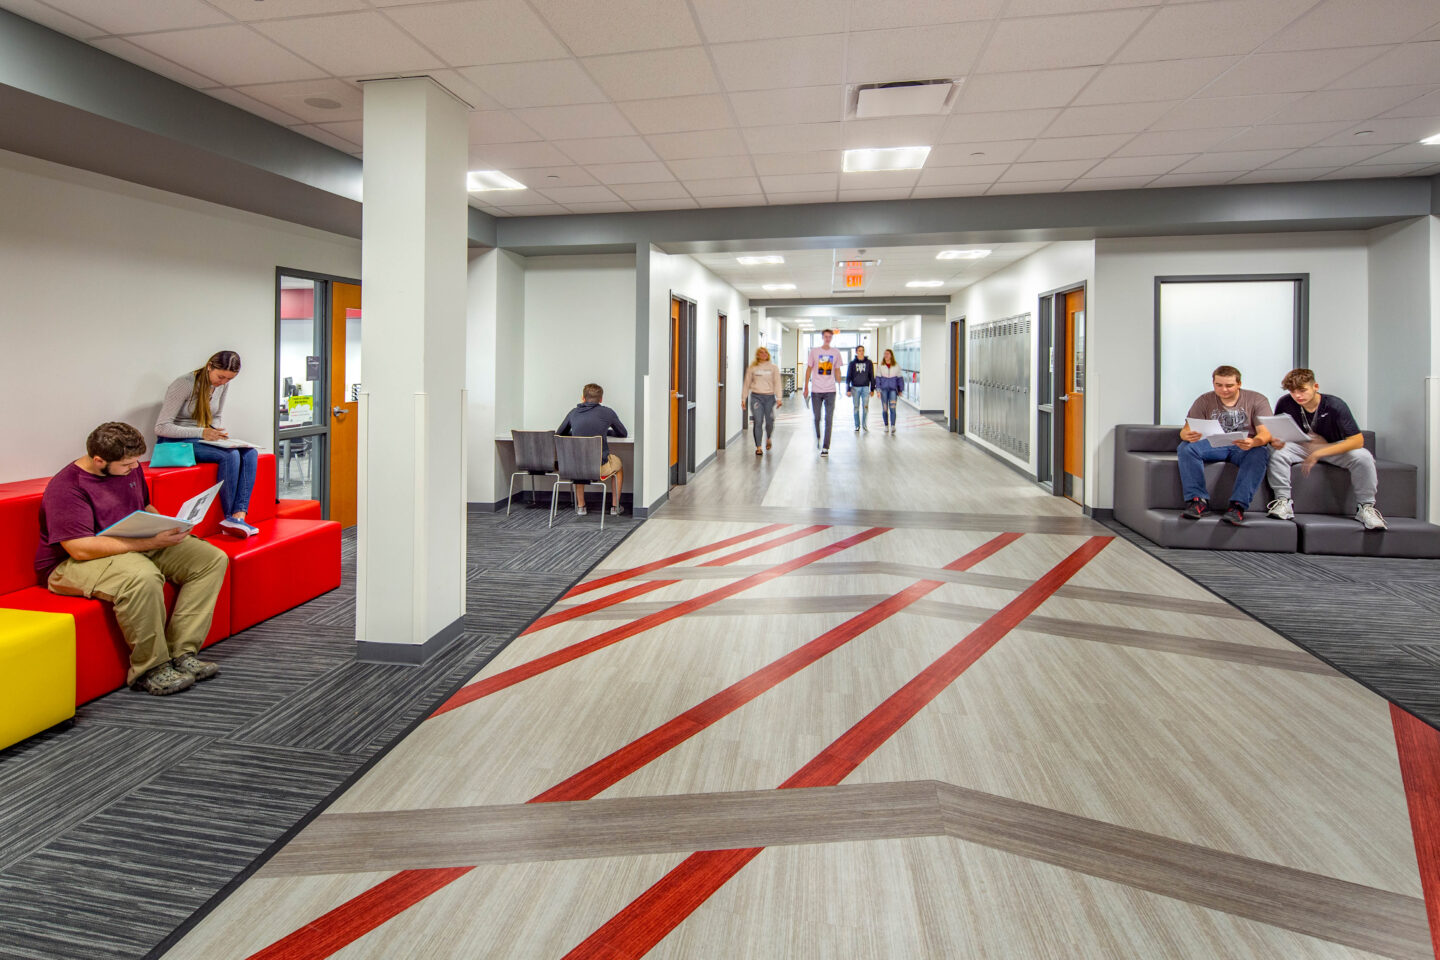 The collaboration hallway features seating for individual study and small group collaboration